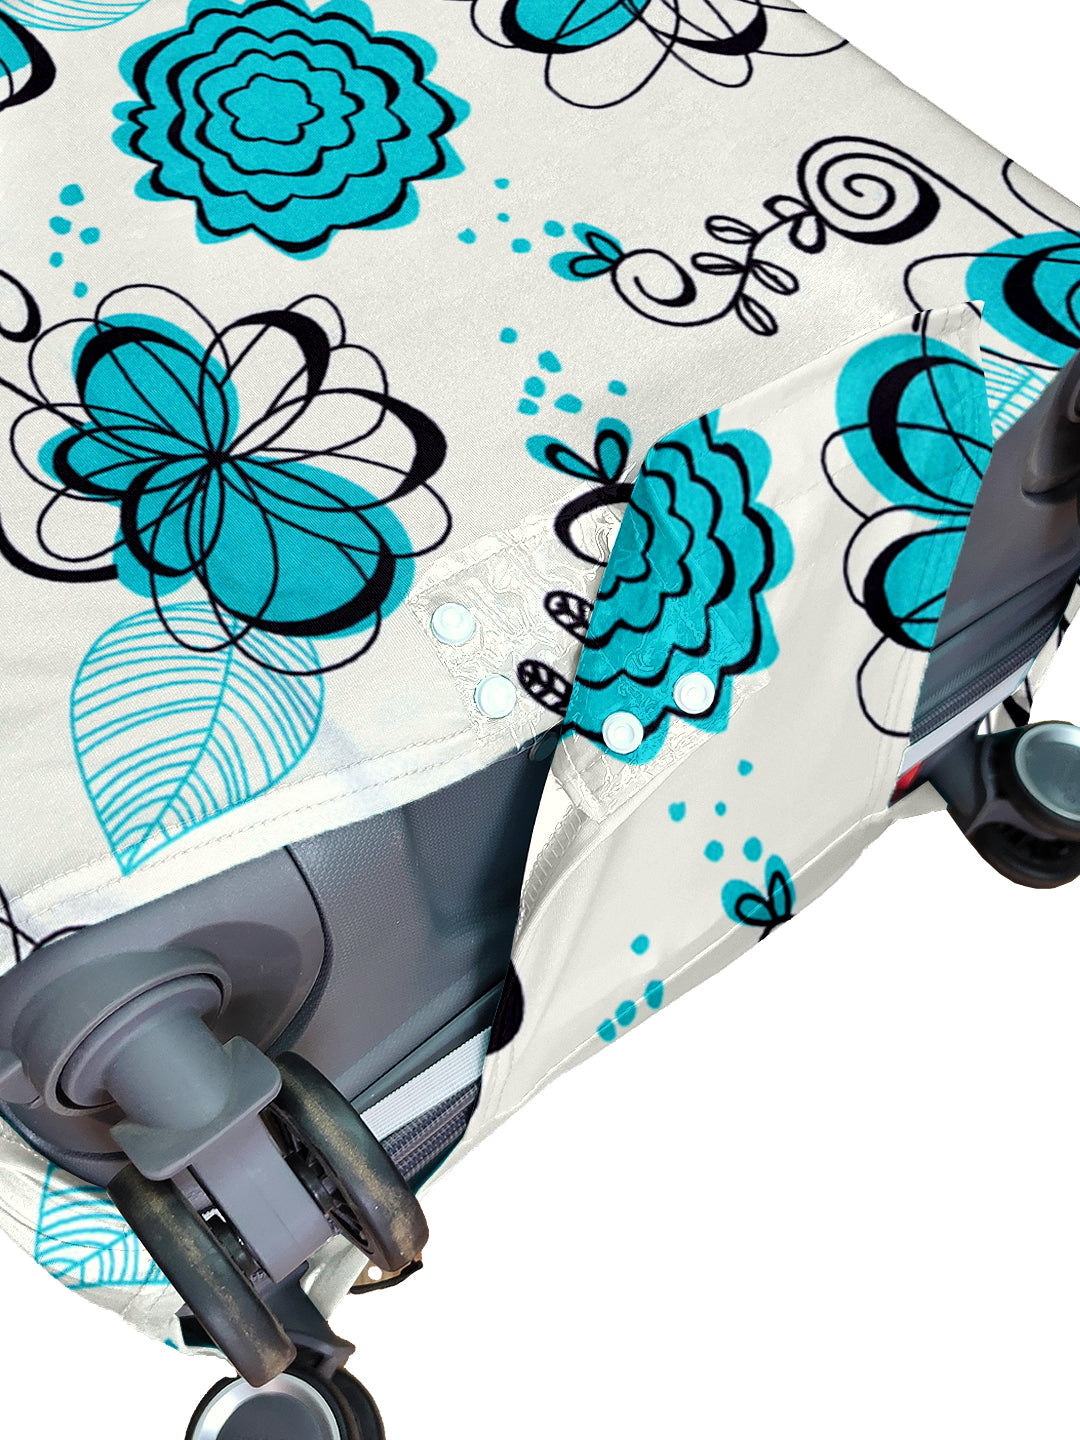 Stretchable Printed Protective Luggage Bag Cover Medium- Turquoise